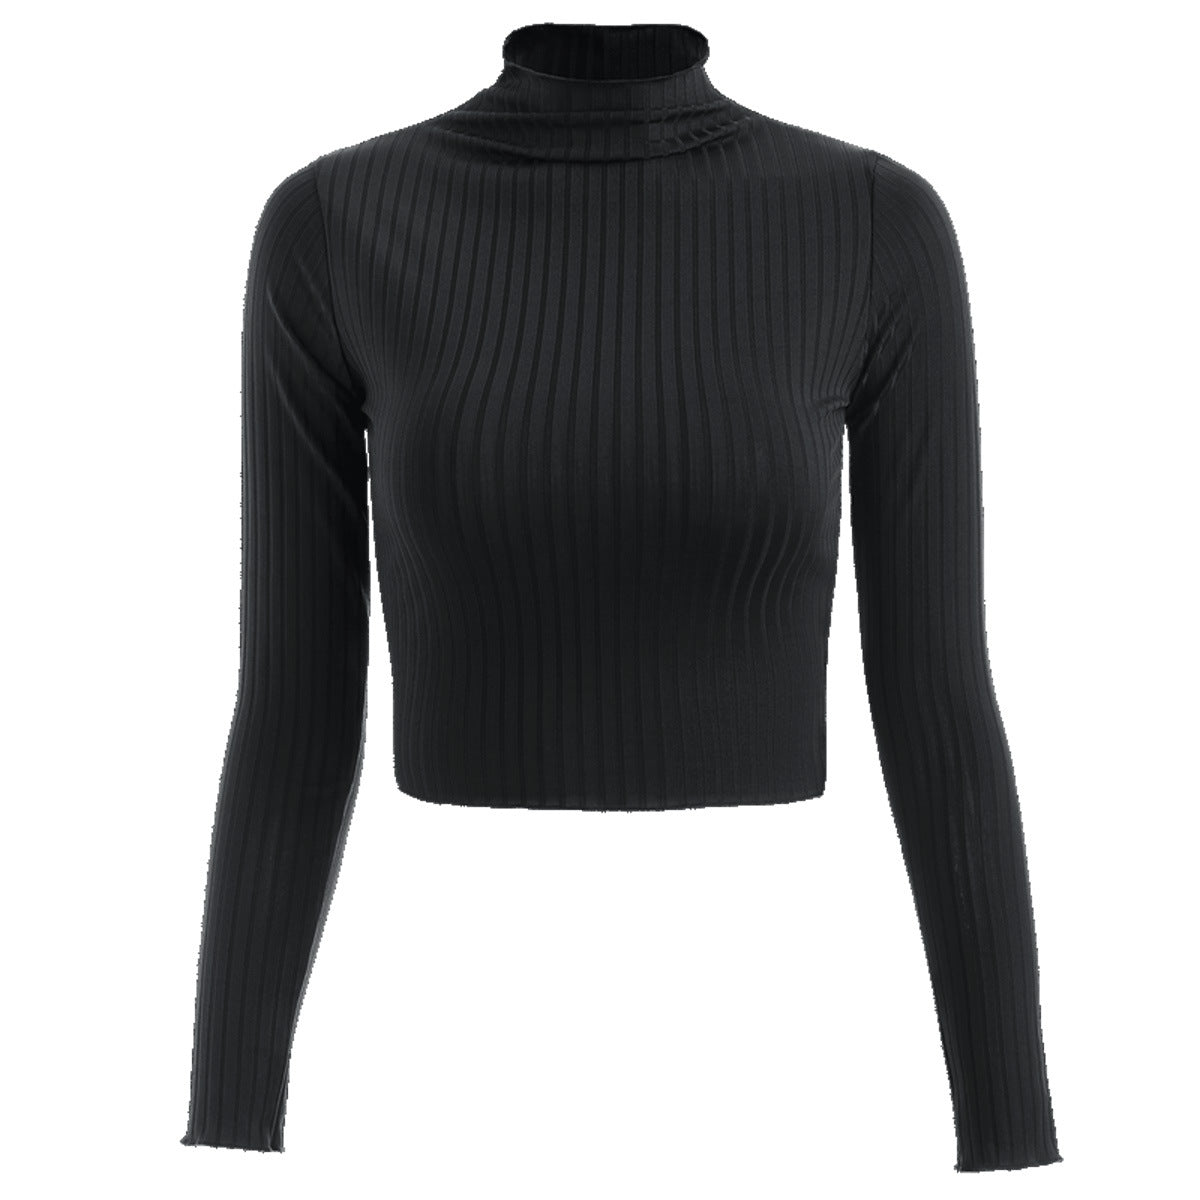 Women's Half Turtleneck Solid Color Long Sleeve Knitted Slim Fit Blouses